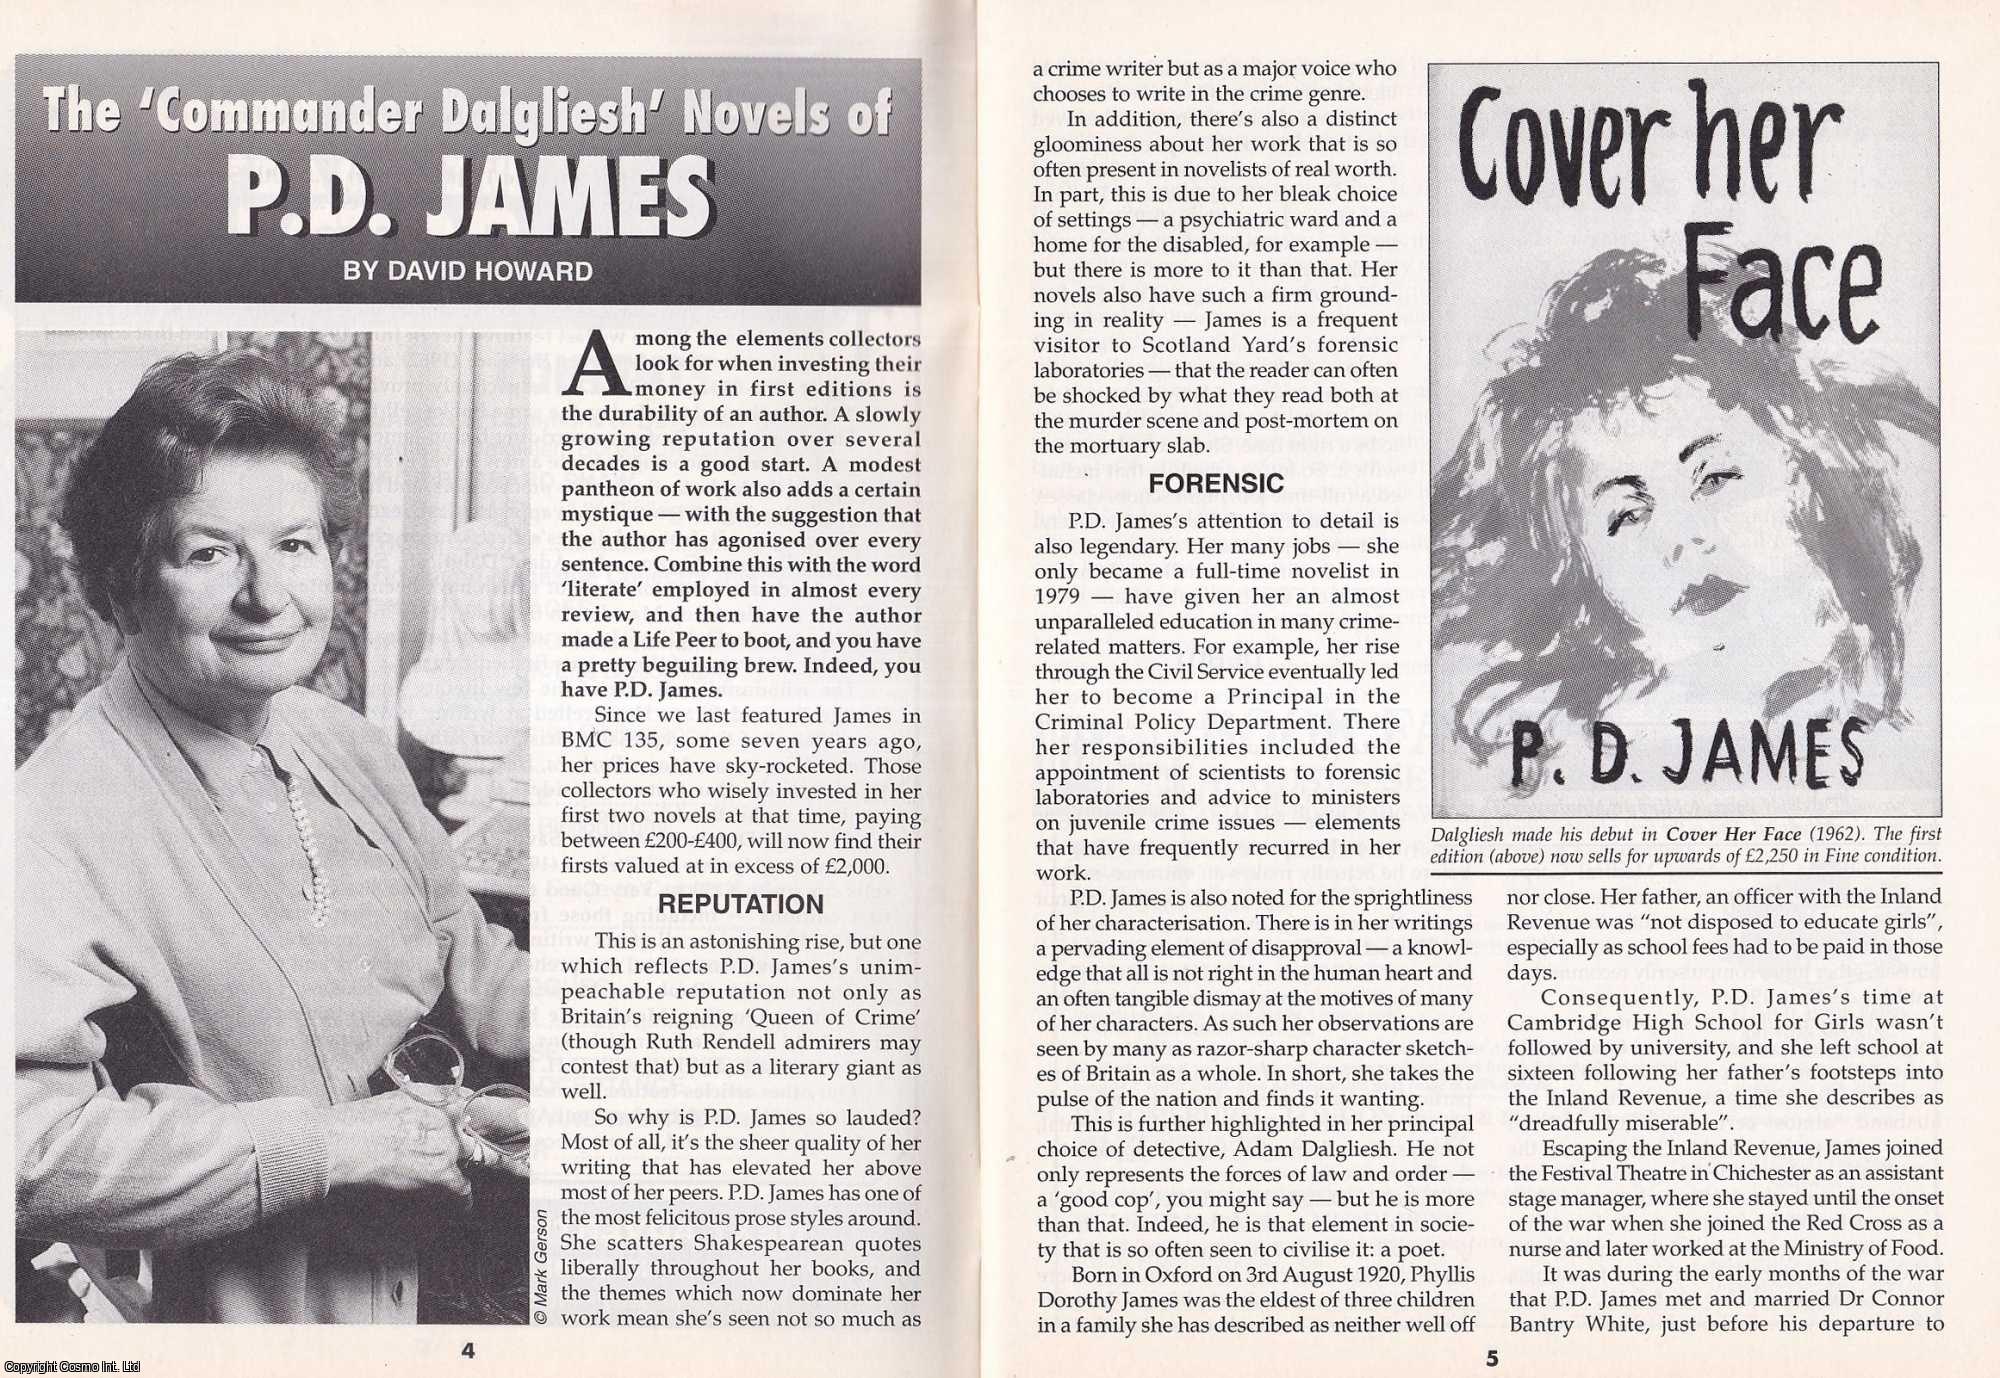 David Howard - The Commander Dalgliesh Novels of P.D. James. This is an original article separated from an issue of The Book & Magazine Collector publication, 2002.